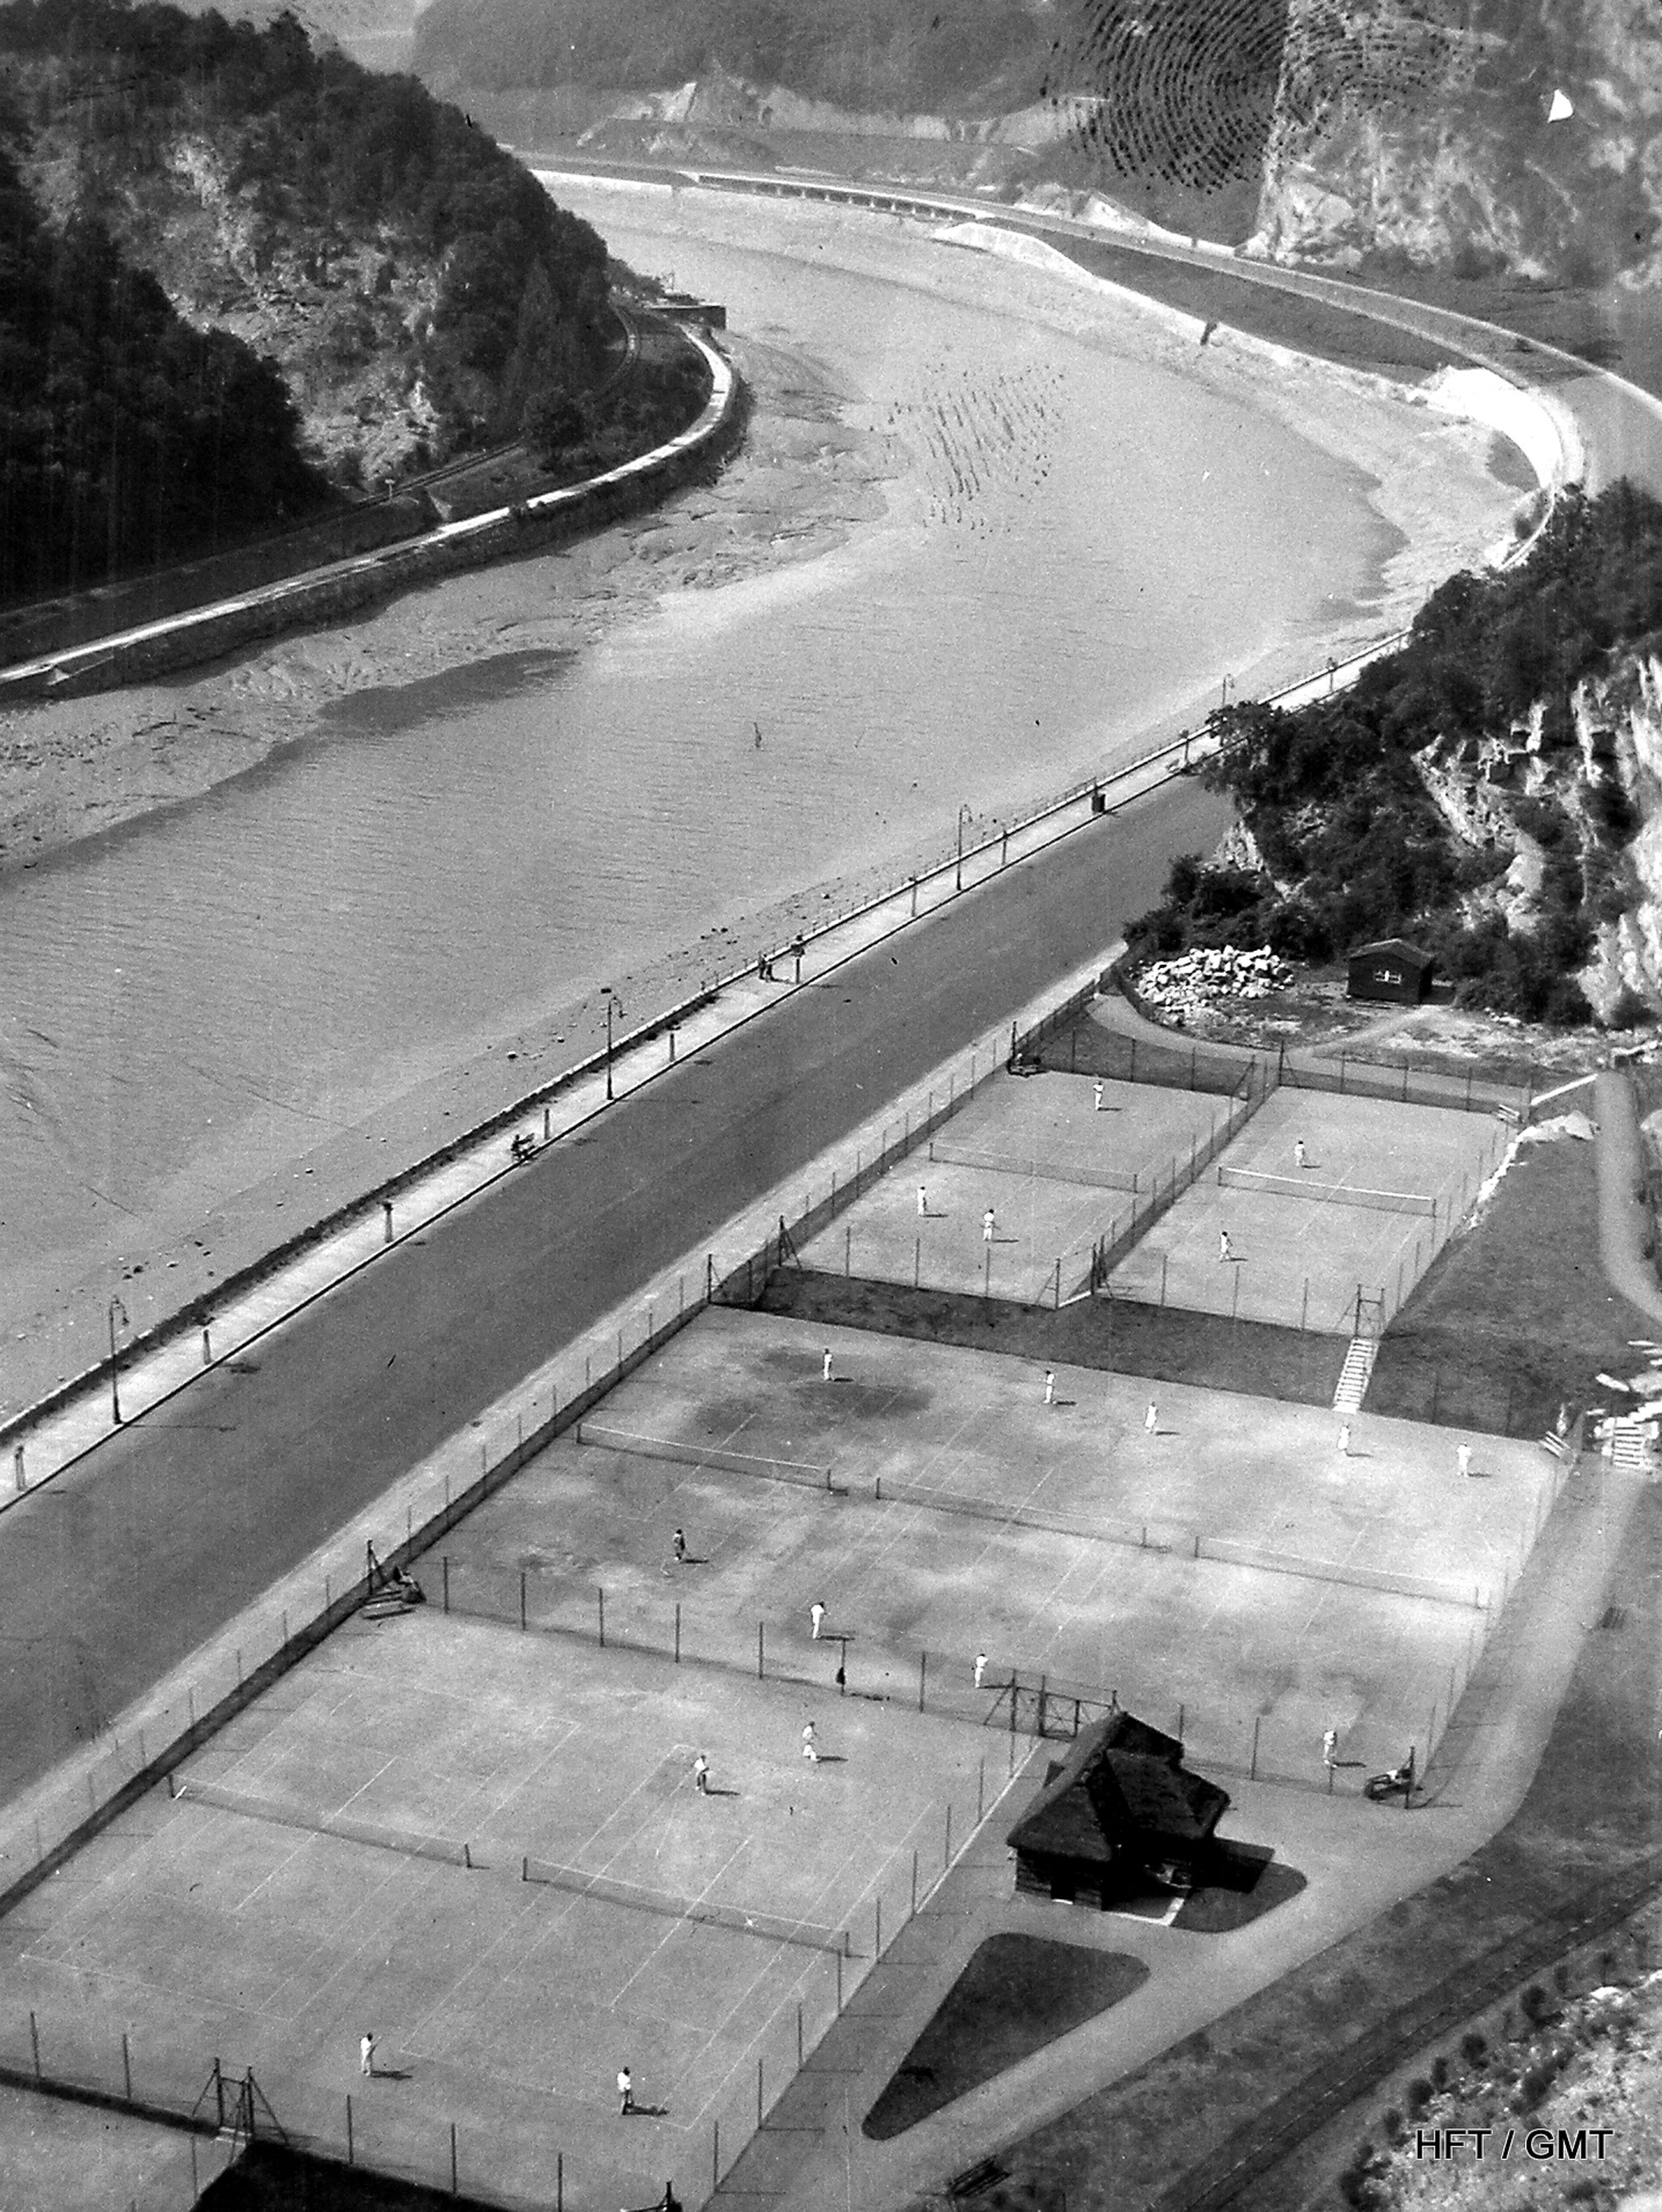 Portway Tennis Courts c. 1930
Via KYP Bristol/The Tarring Collection. ca. 1930.

The Tarring Collection is a grand set of images of Bristol taken by Herbert Frank Tarring, who w...